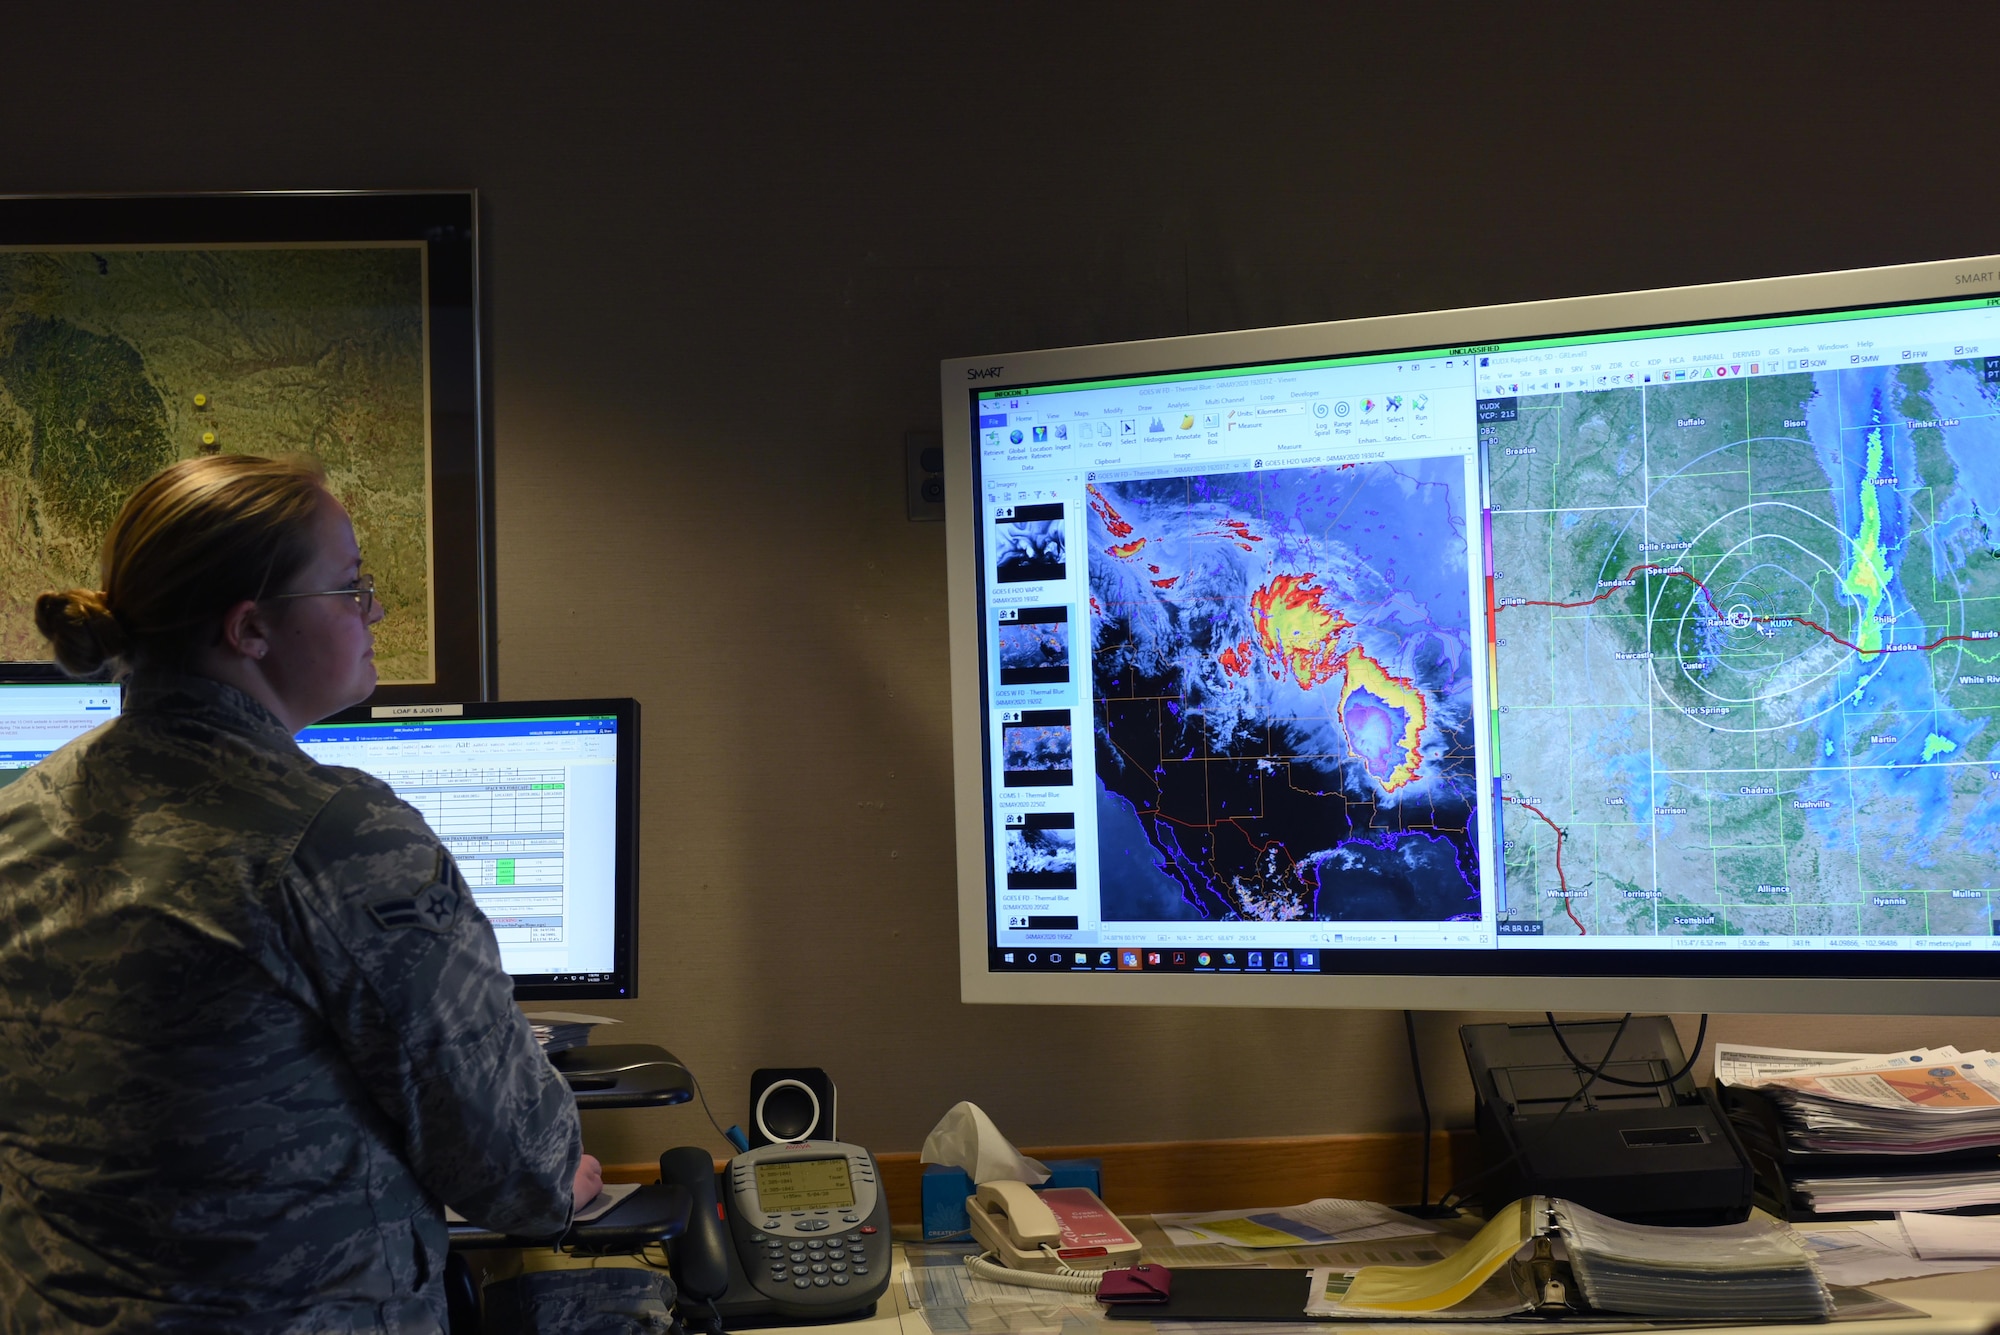 Airman 1st Class Wendi Mueller, a 28th Operations Support Squadron weather apprentice, reviews radar imagery for a weather report at Ellsworth Air Force Base, S.D., May 4, 2020. This weather report was used to inform aviators in preparation for a non-stop deployment to the U.S. European Command area of responsibility. (U.S. Air Force photo by Staff Sgt. Hailey Staker)